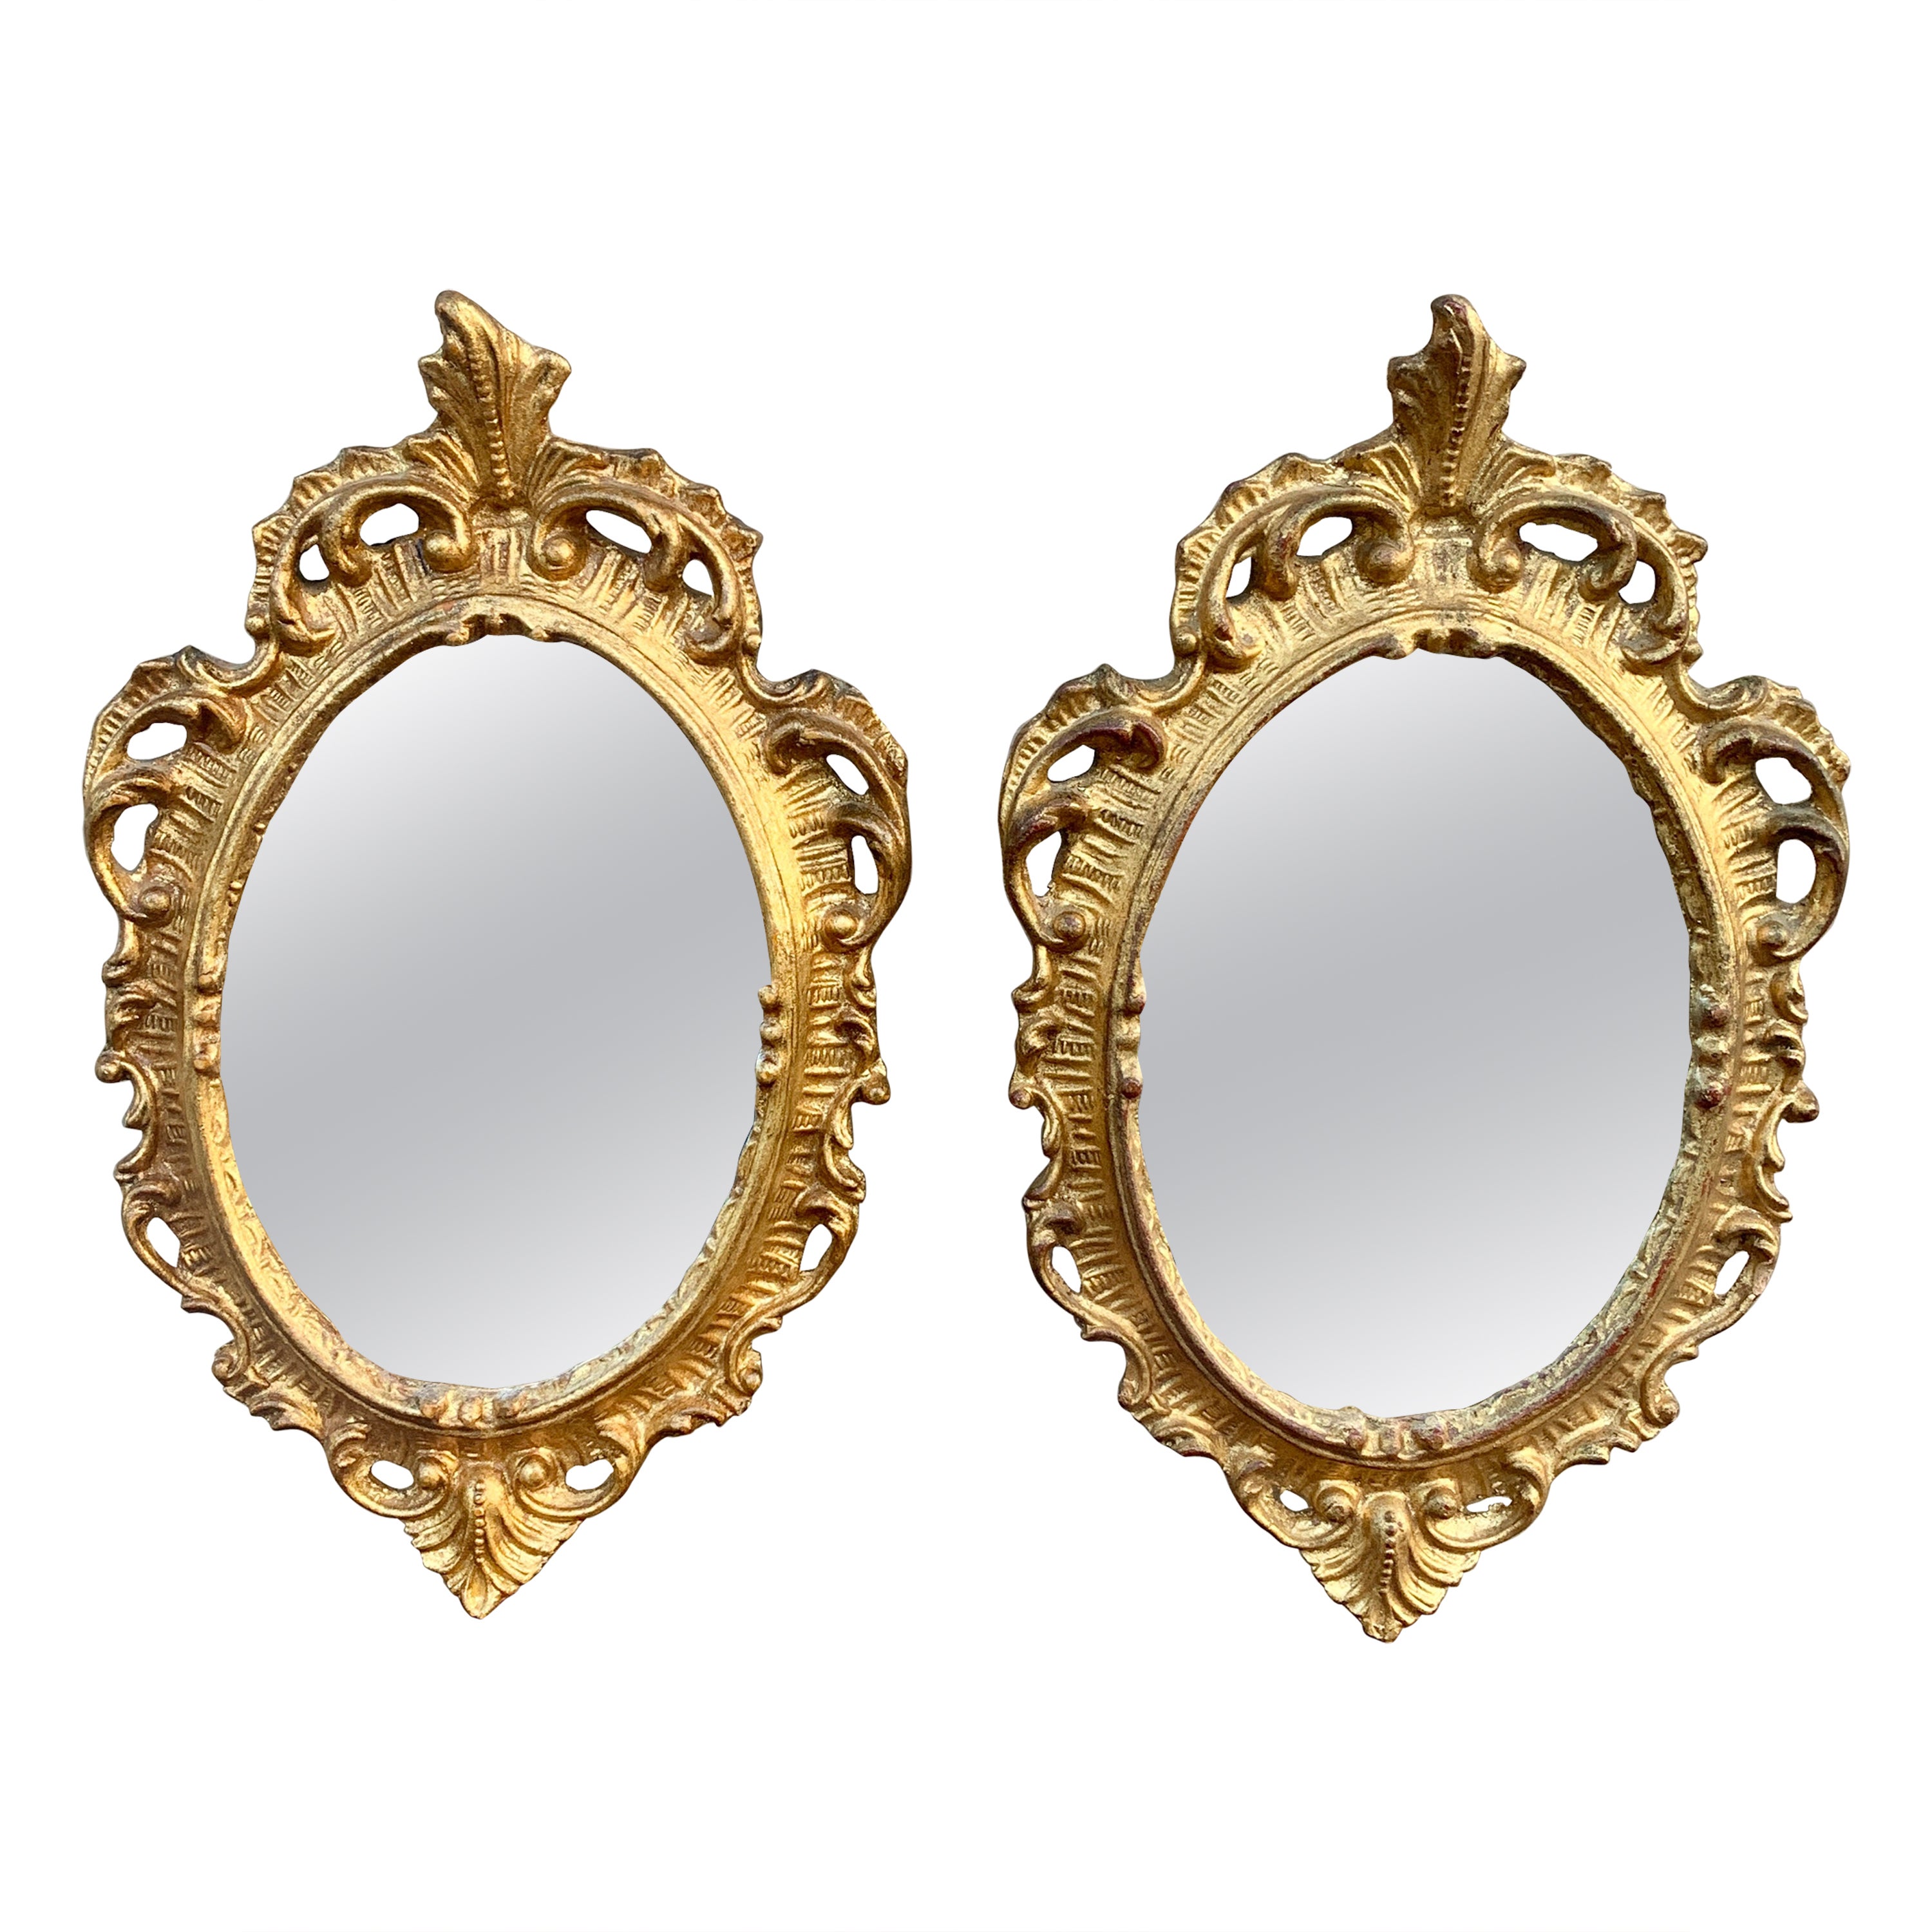 Italian Florentine Baroque Gold Giltwood Wall Mirrors, Pair For Sale